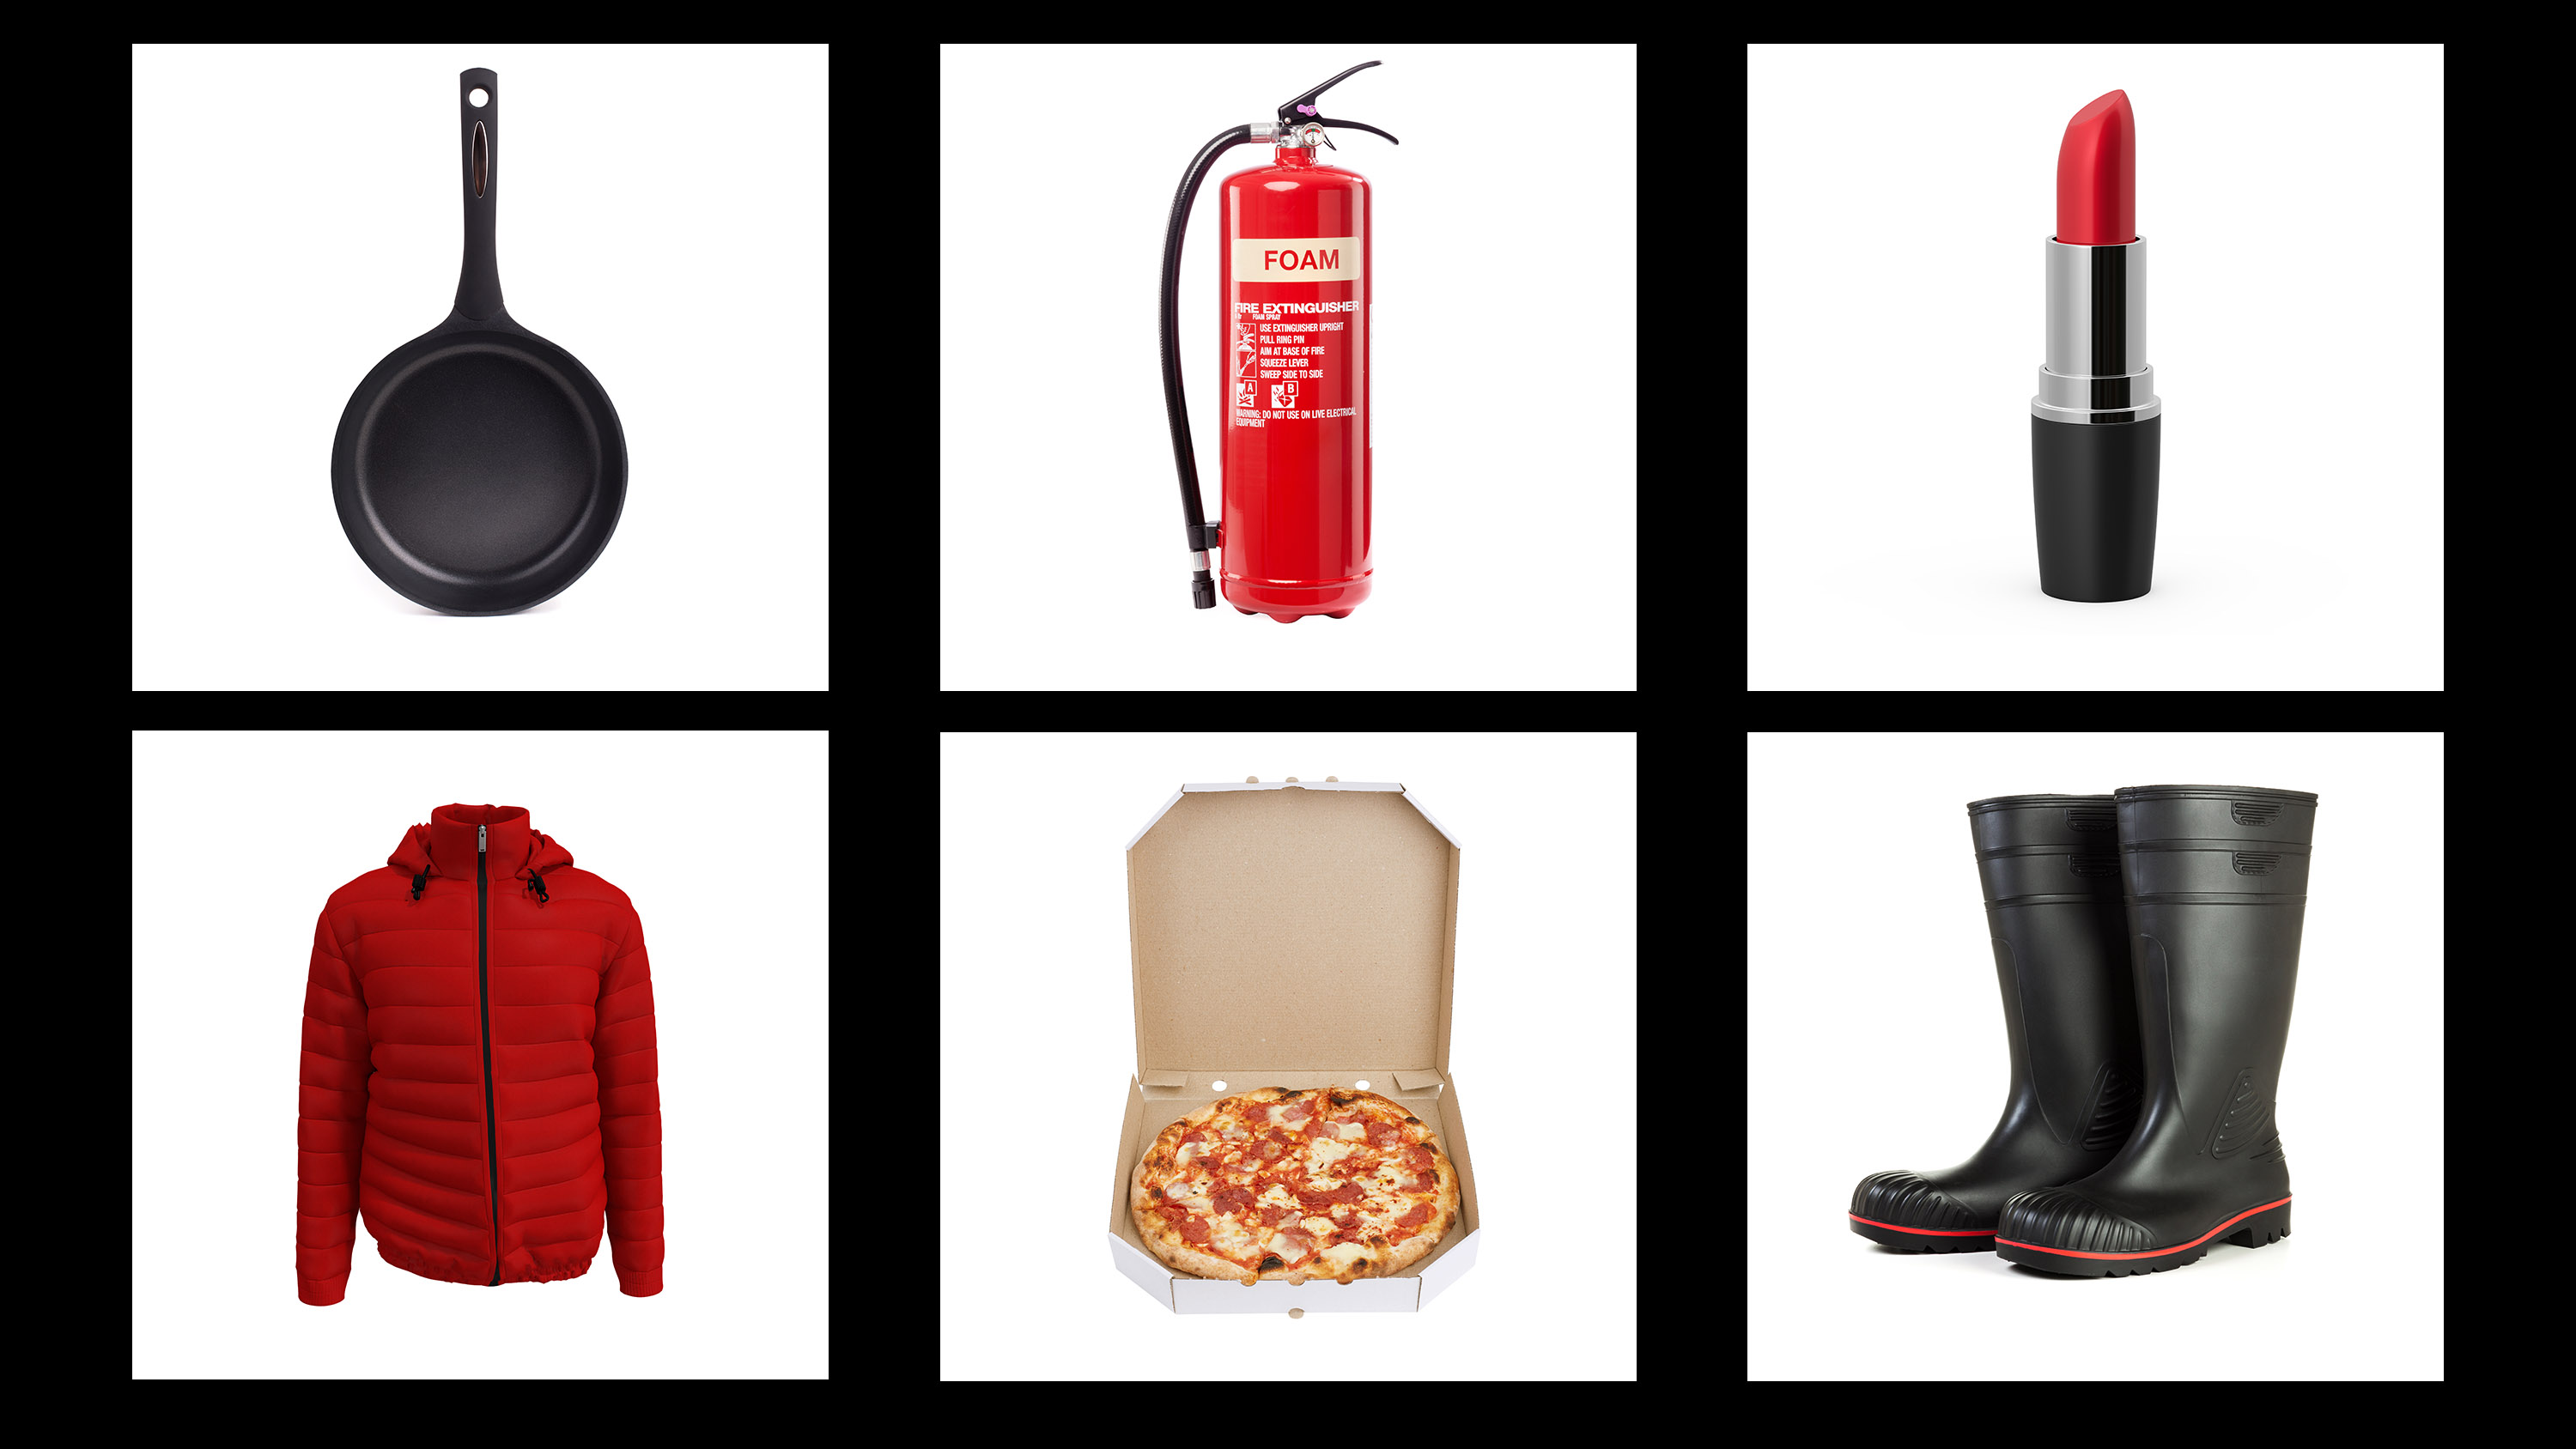 a cast iron pan, a fire extinguisher, a red lipstick a red jacket, a pizza in an open box, and a pair of rain boots